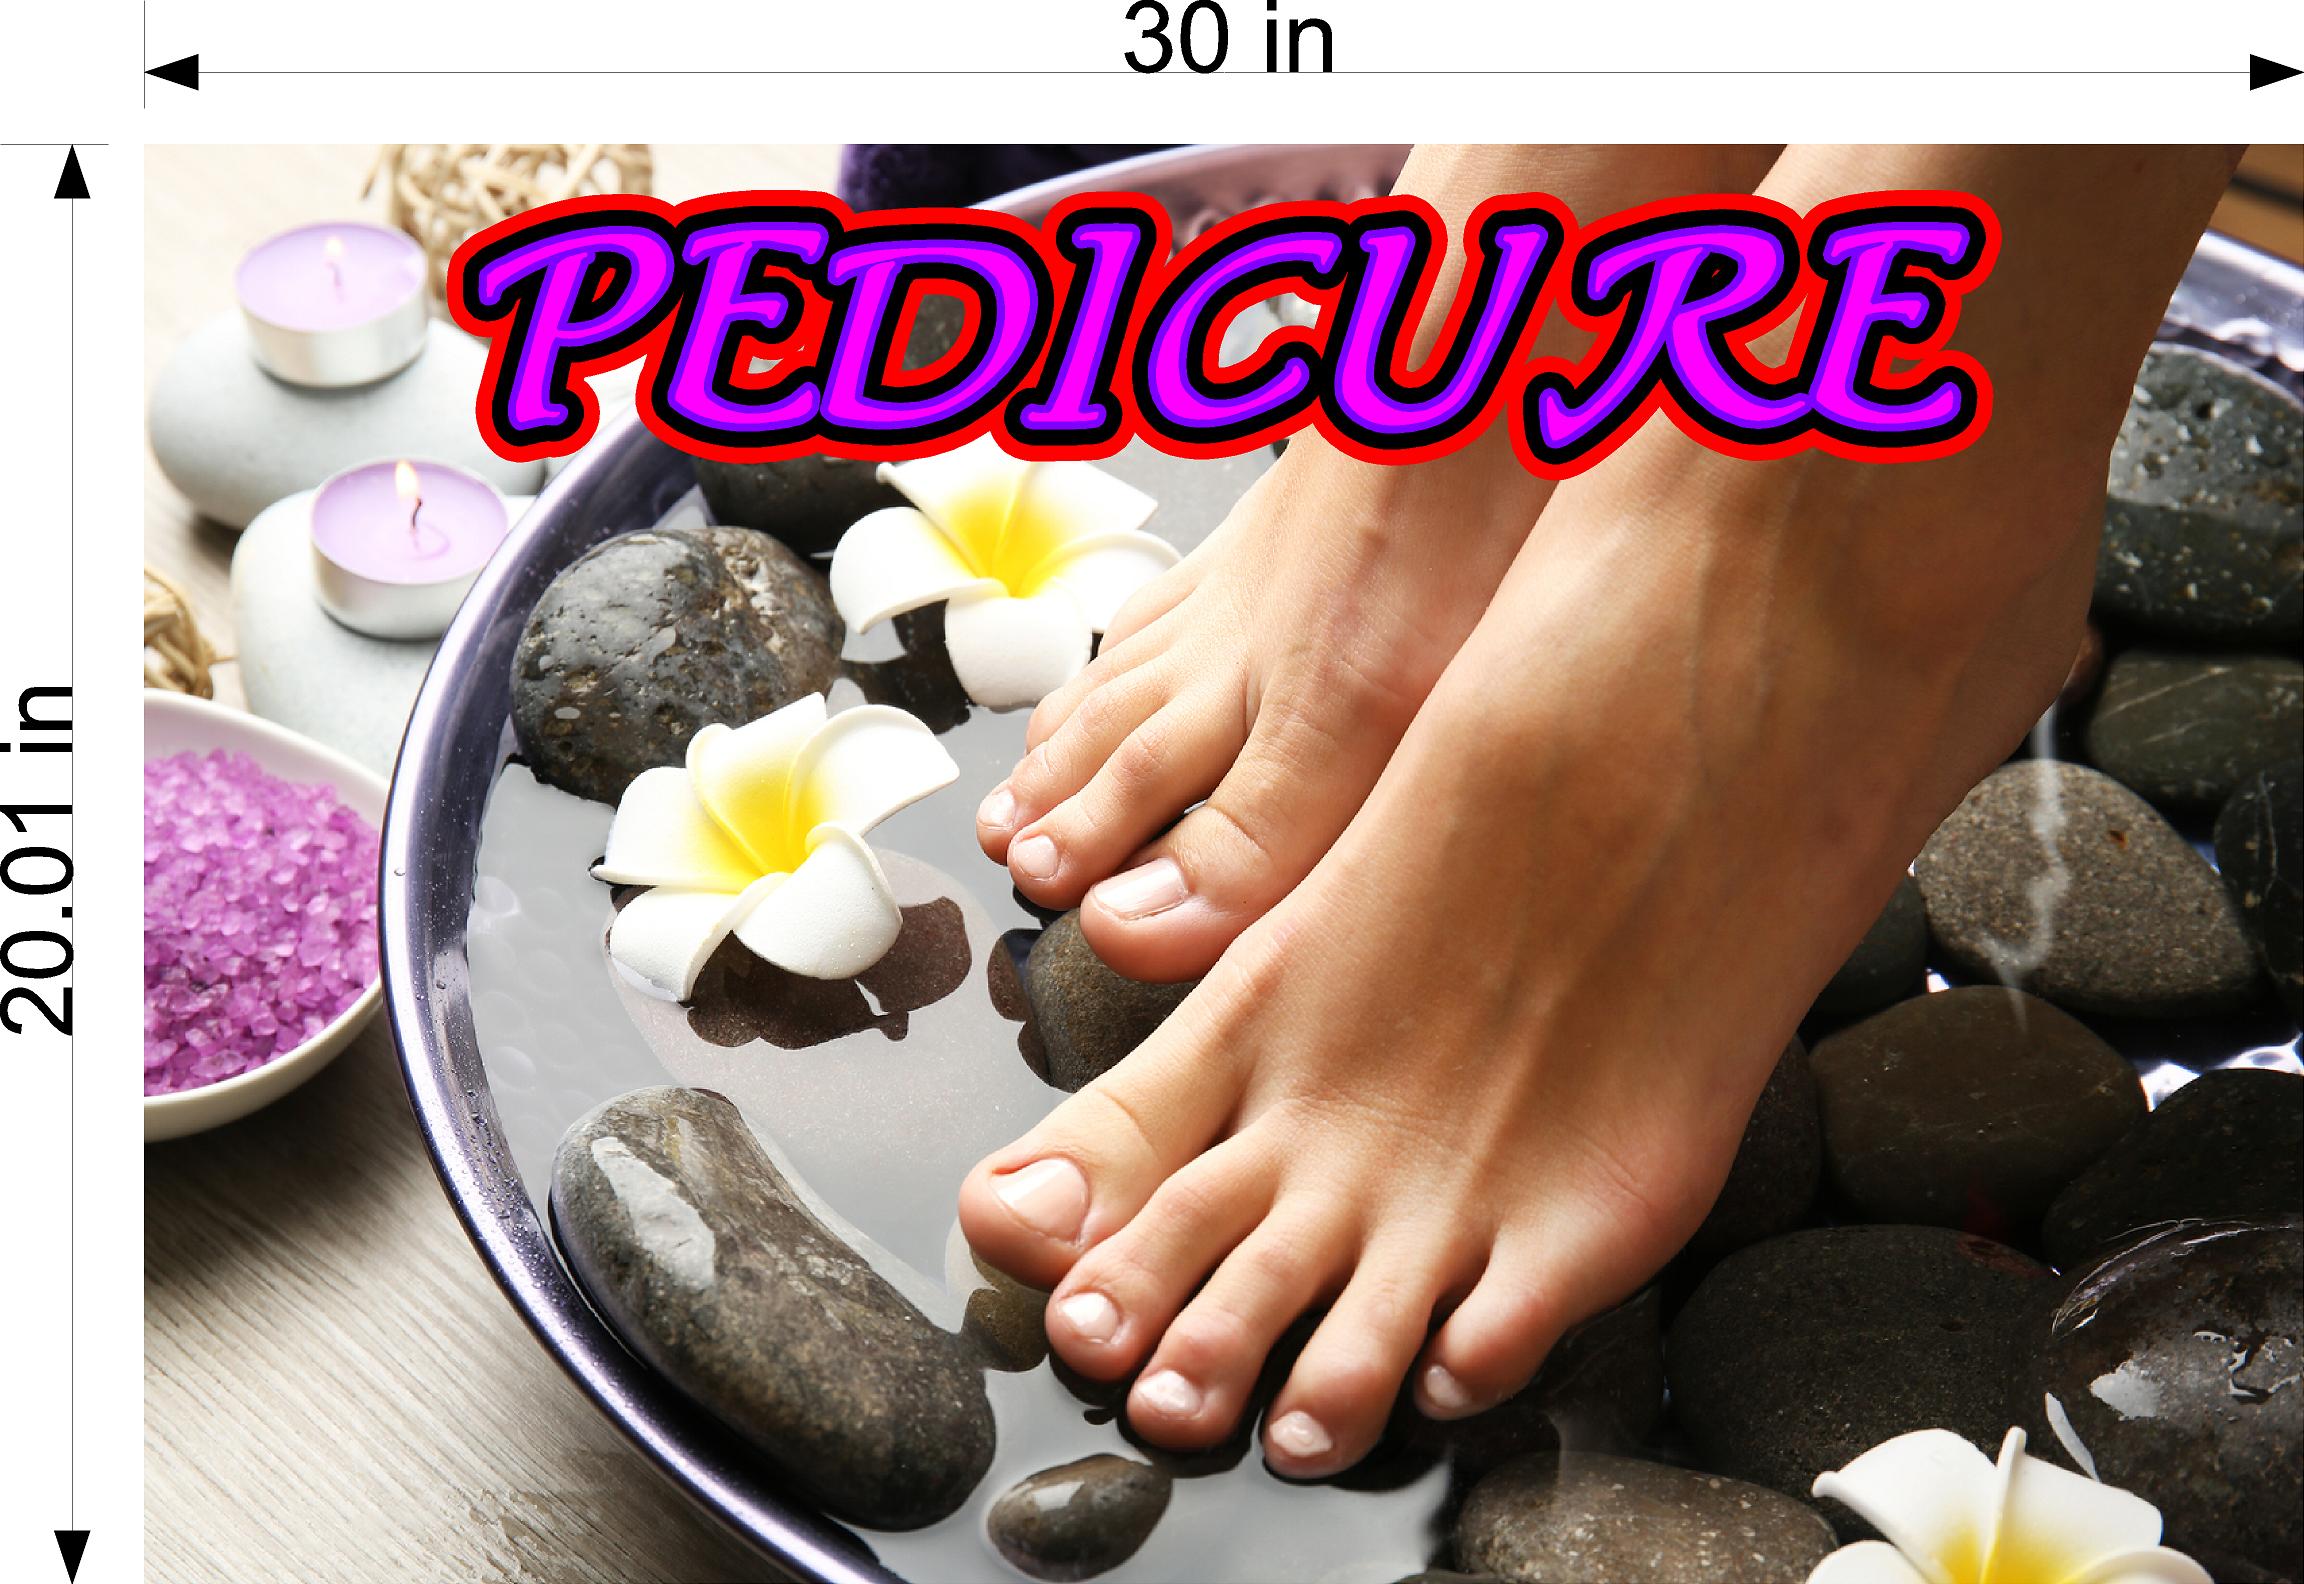 Pedicure 03 Wallpaper Poster Decal with Adhesive Backing Wall Sticker Decor Indoors Interior Sign Horizontal